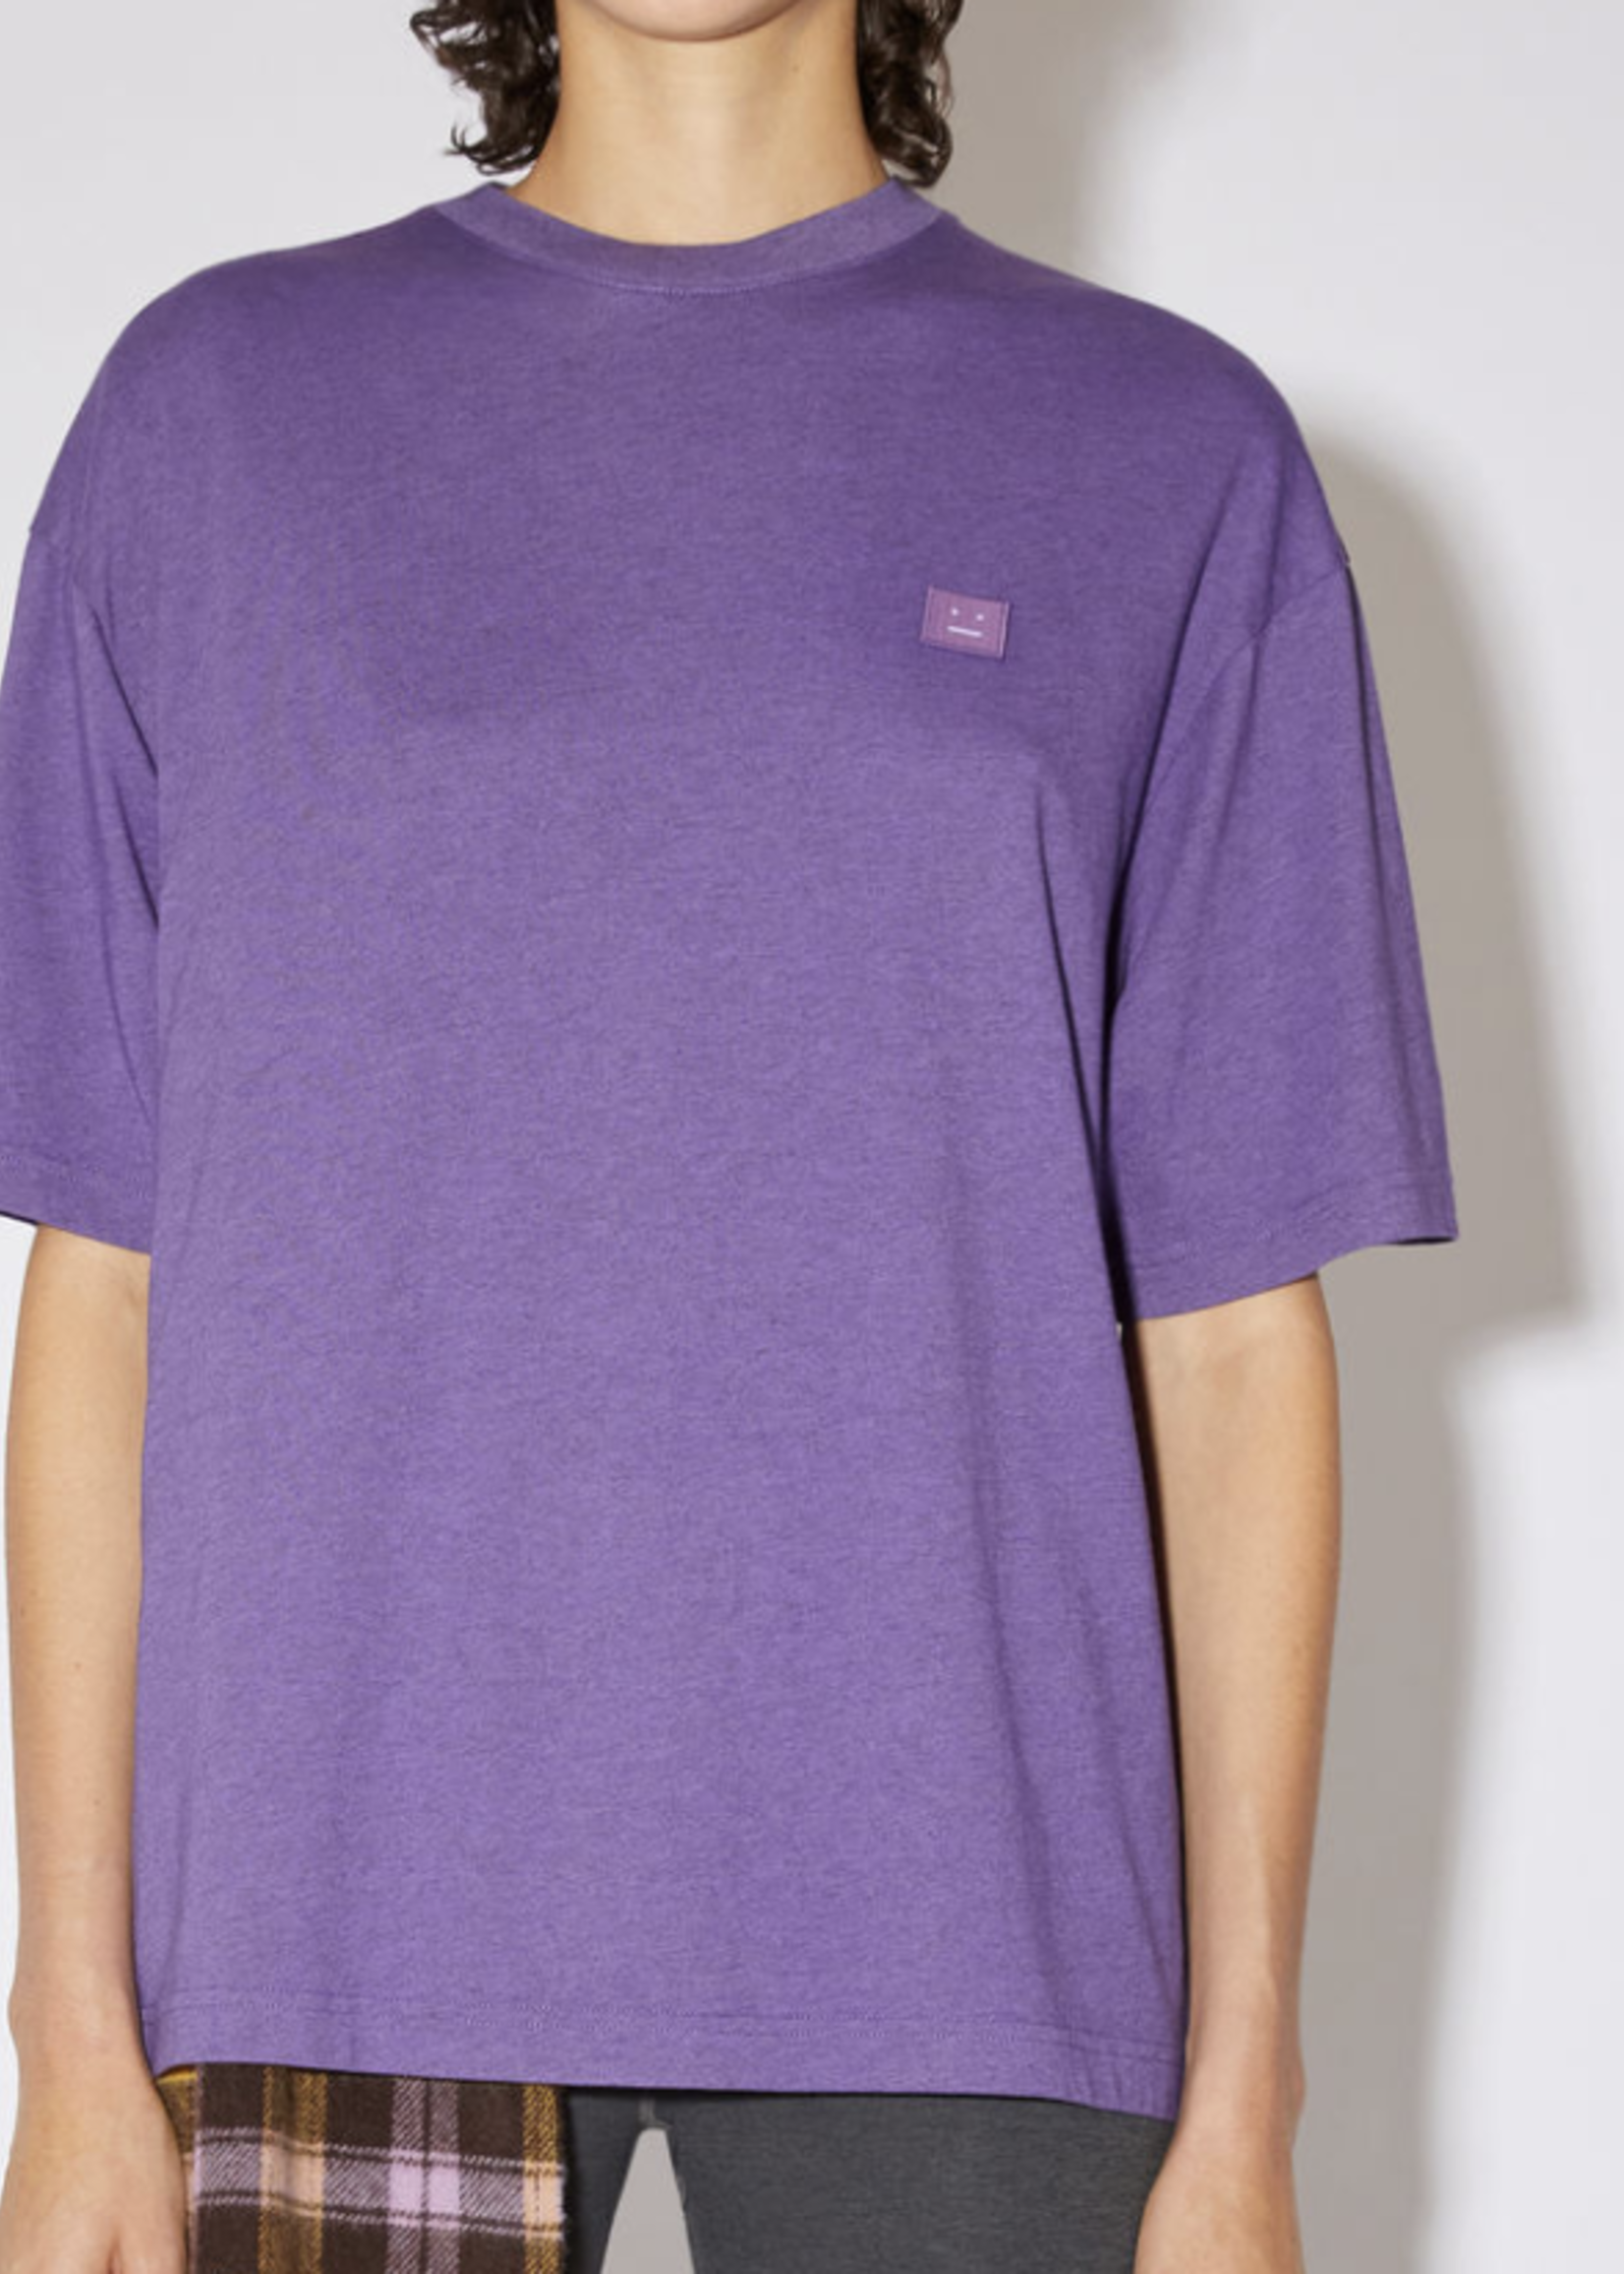 Acne Studios Acne Studios relaxed fit t-shirt electric purple